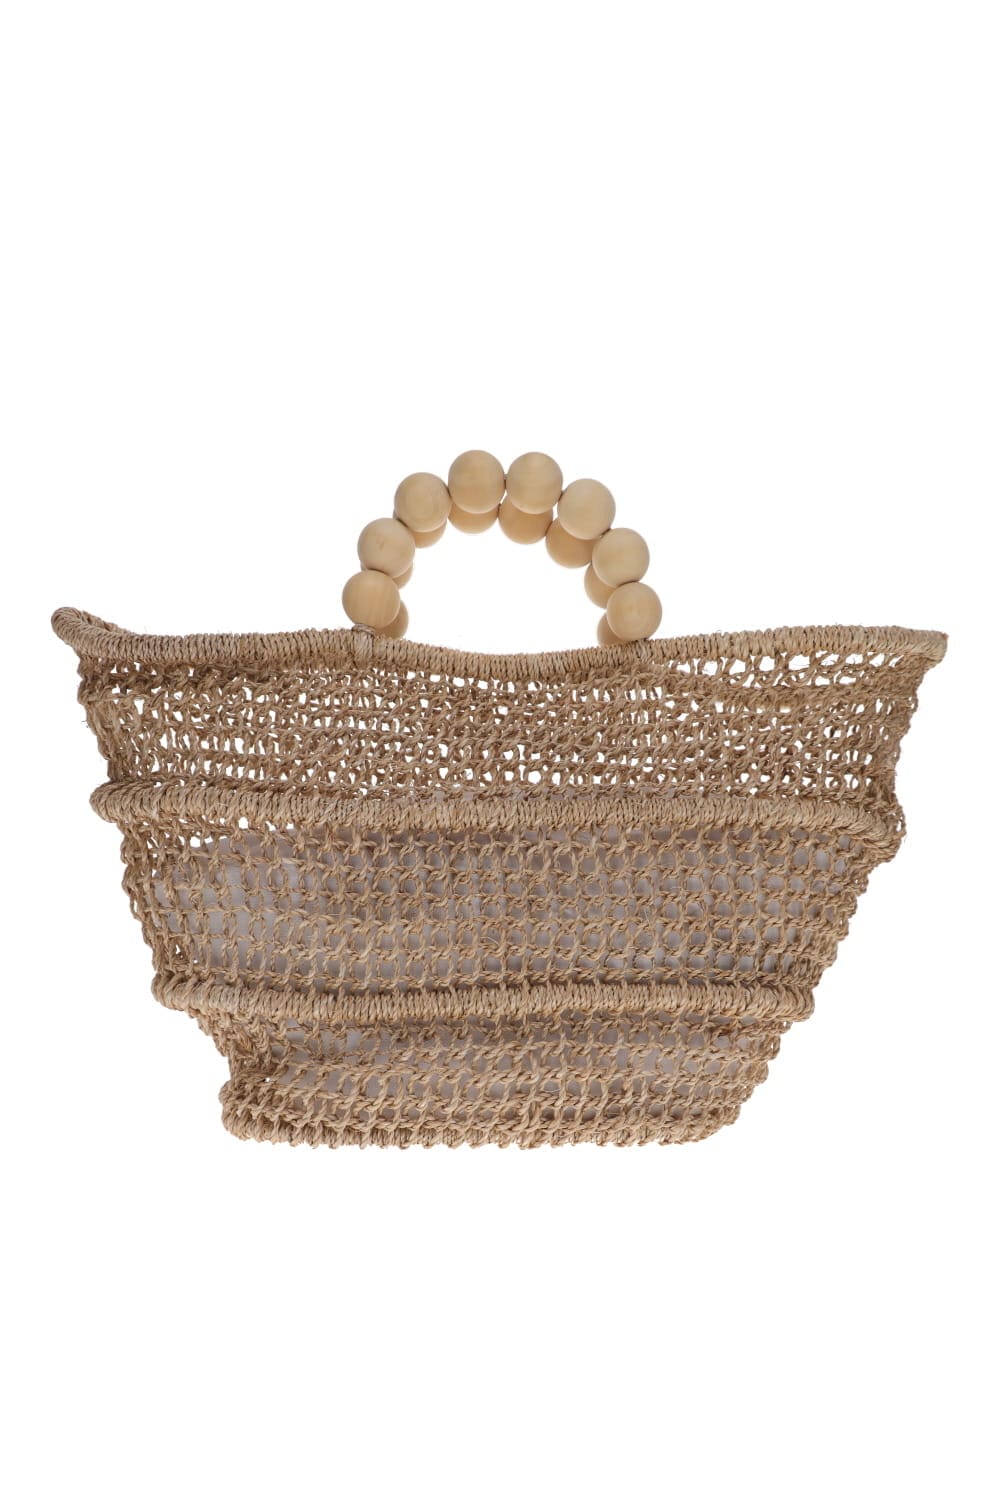 POOLSIDE The Comporta Natural Straw Tote